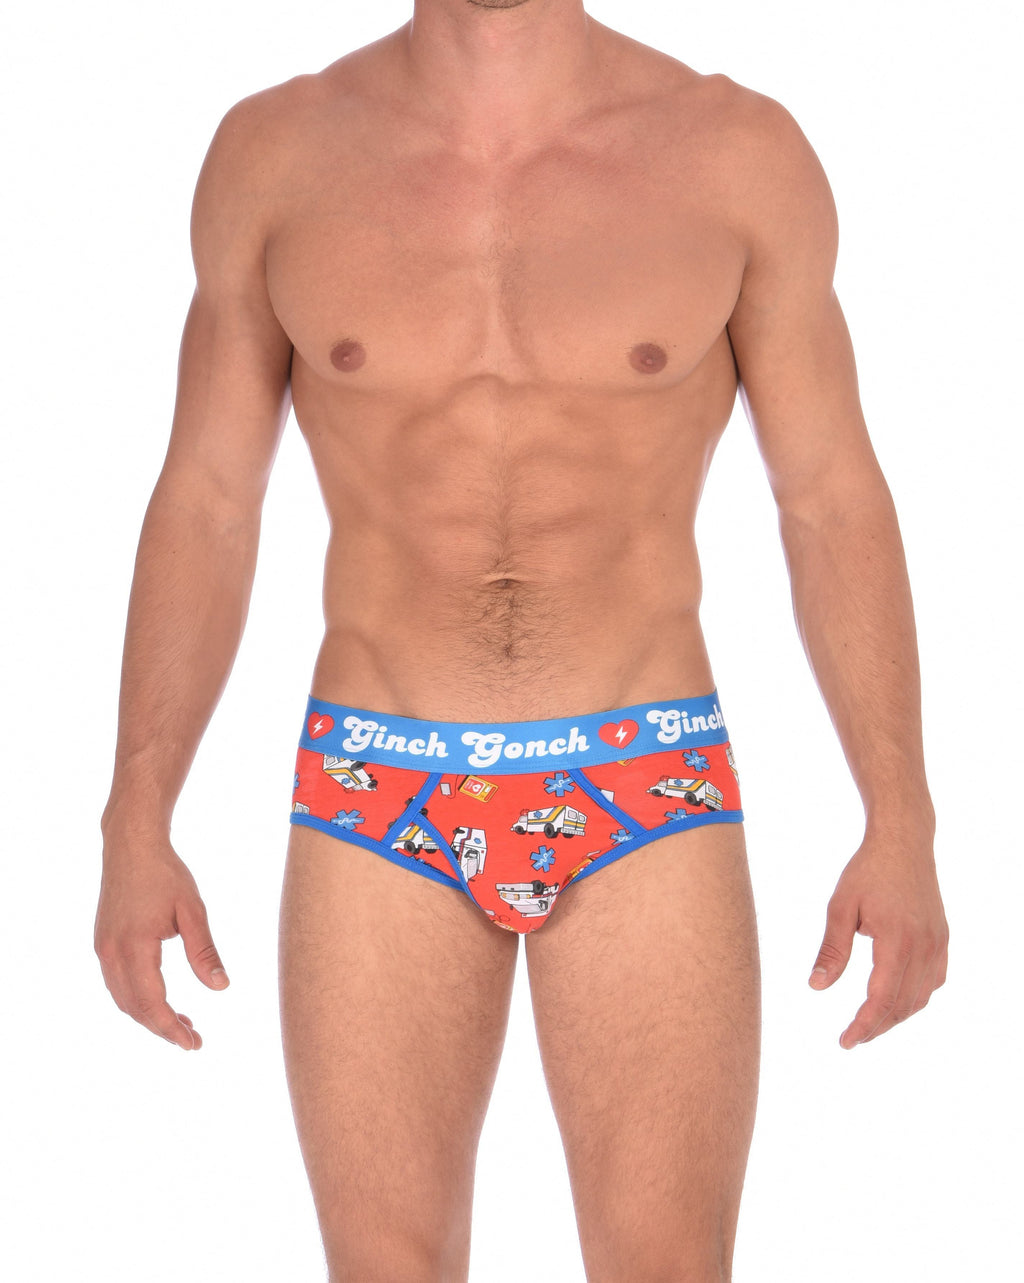 Ginch Gonch GG EMT low rise Brief men's ambulance print with medical symbol and equipment on red background with blue trim and printed waistband front